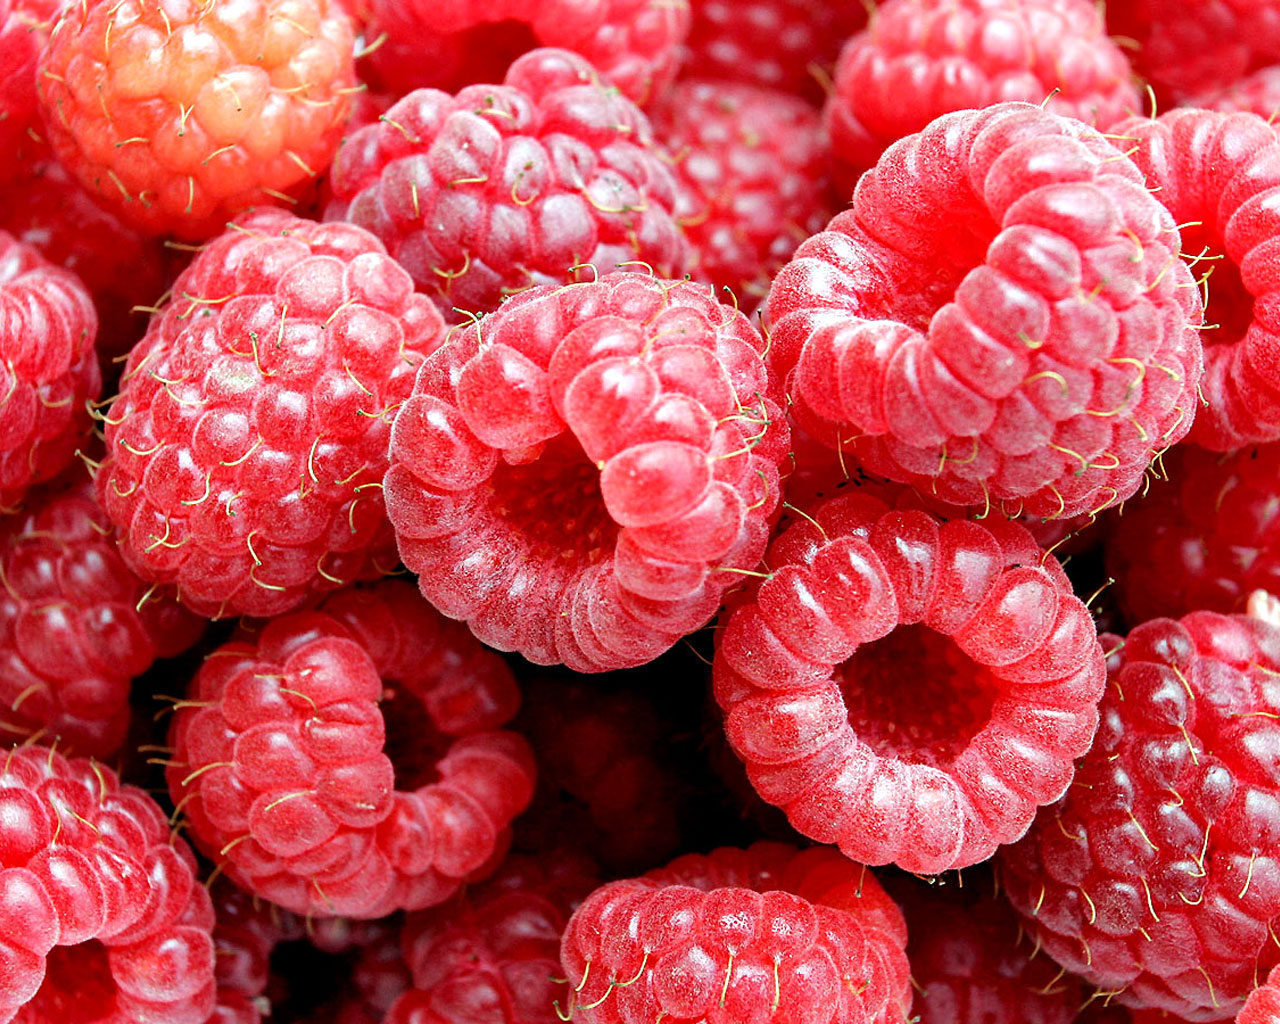 What Color Are Raspberries?